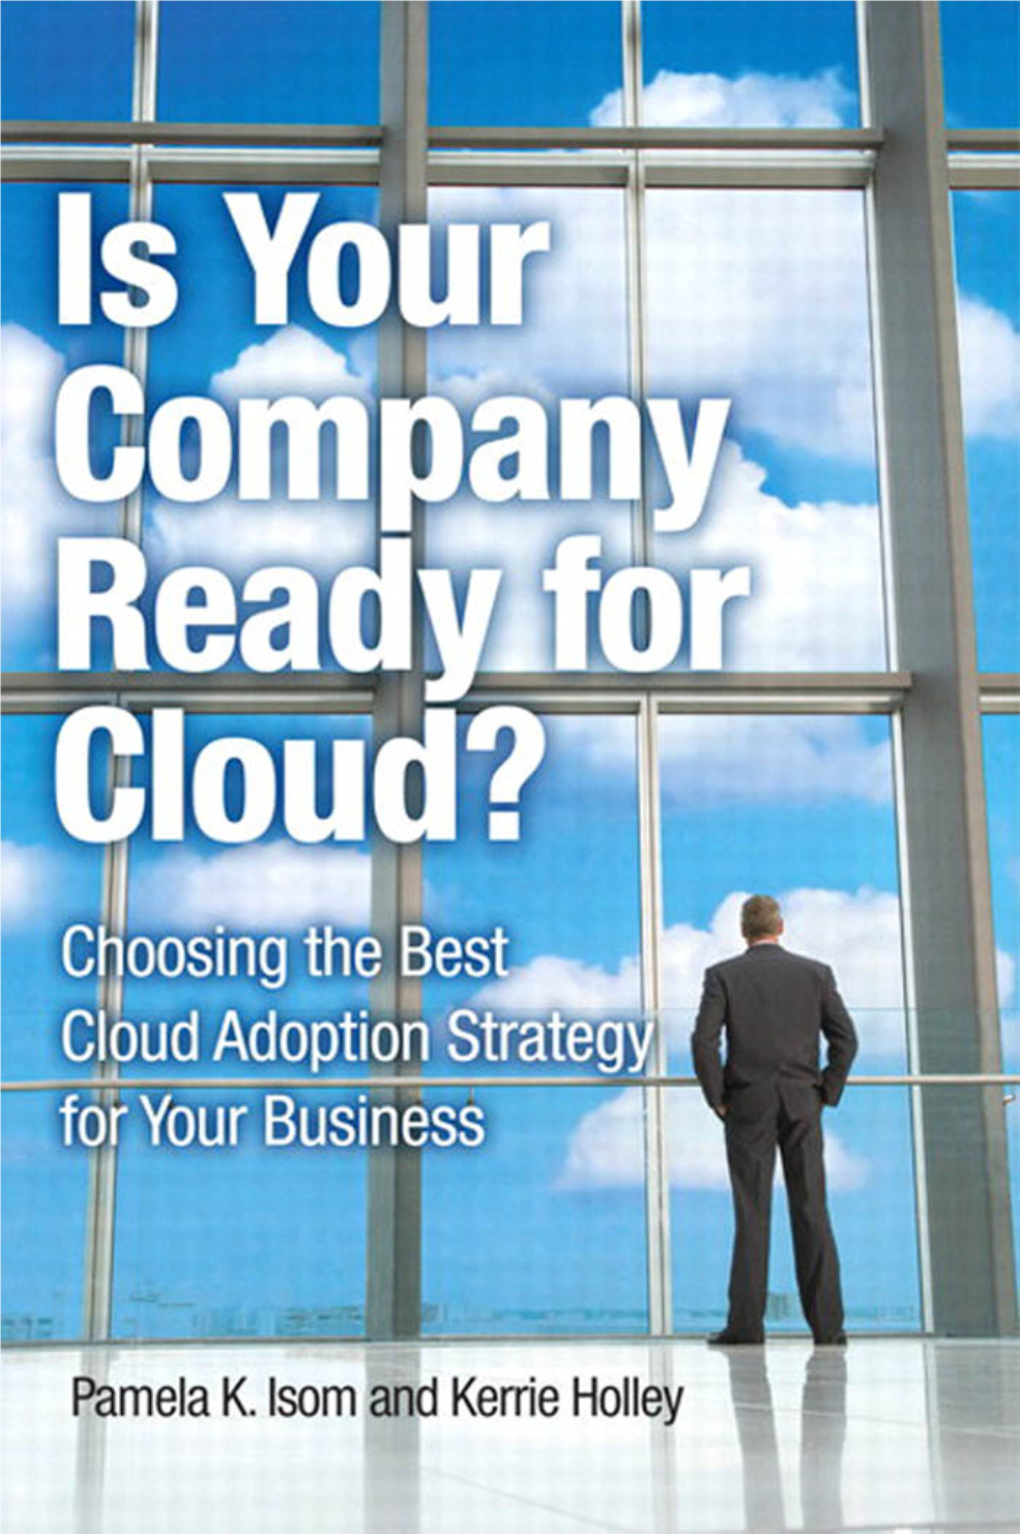 Choosing the Best Cloud Adoption Strategy for Your Business